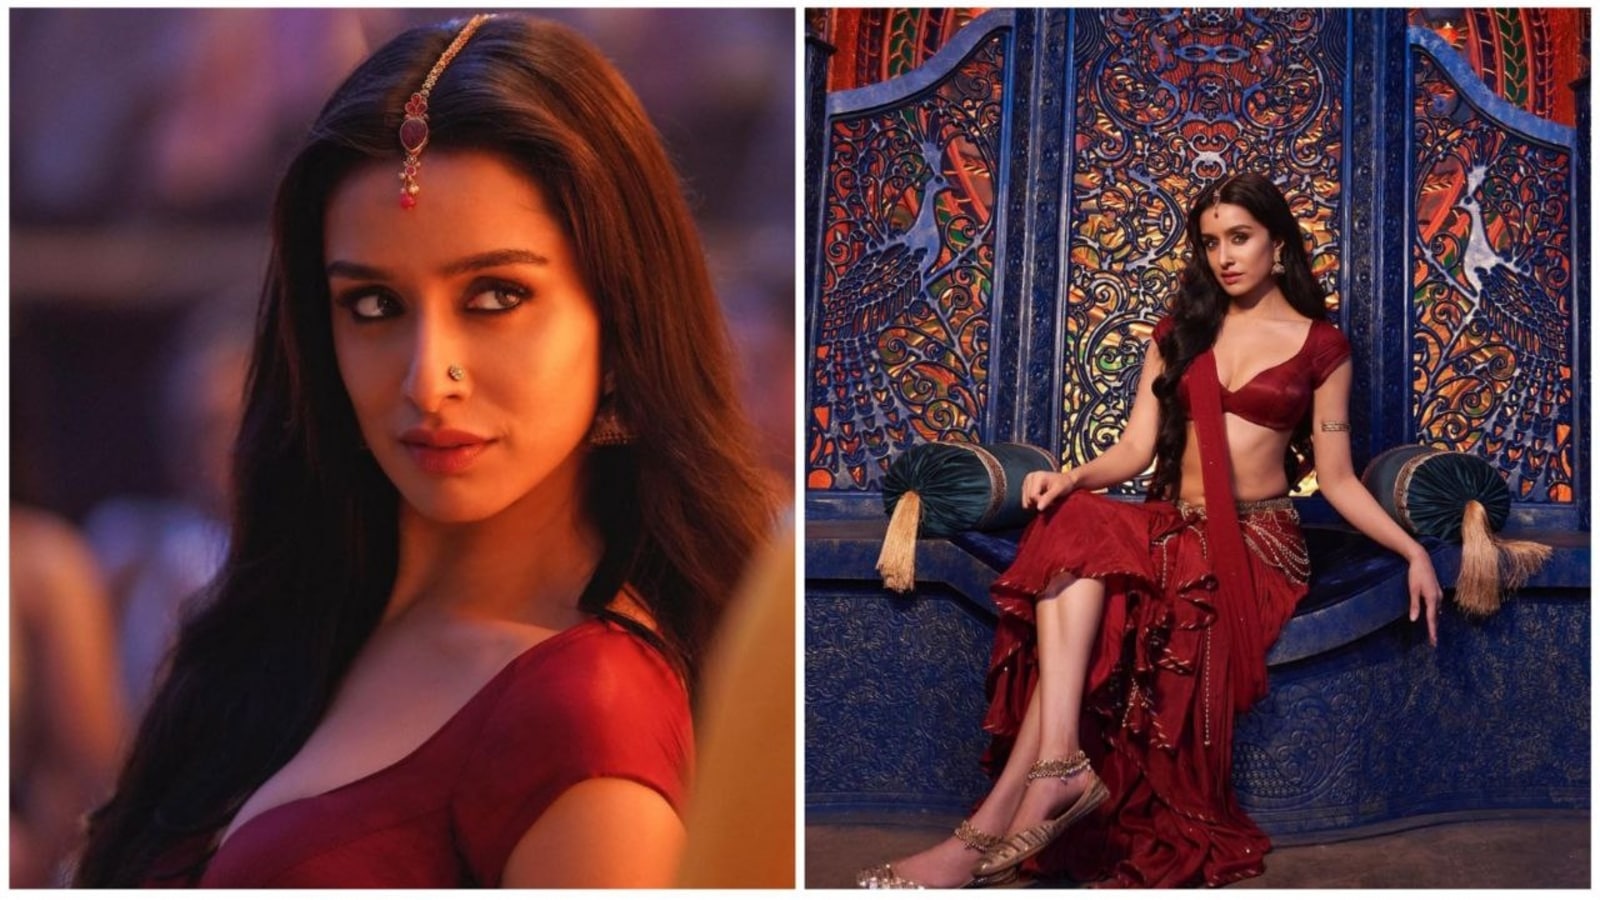 shraddha-kapoor-looks-like-a-goddess-in-her-red-hot-saree-avatar